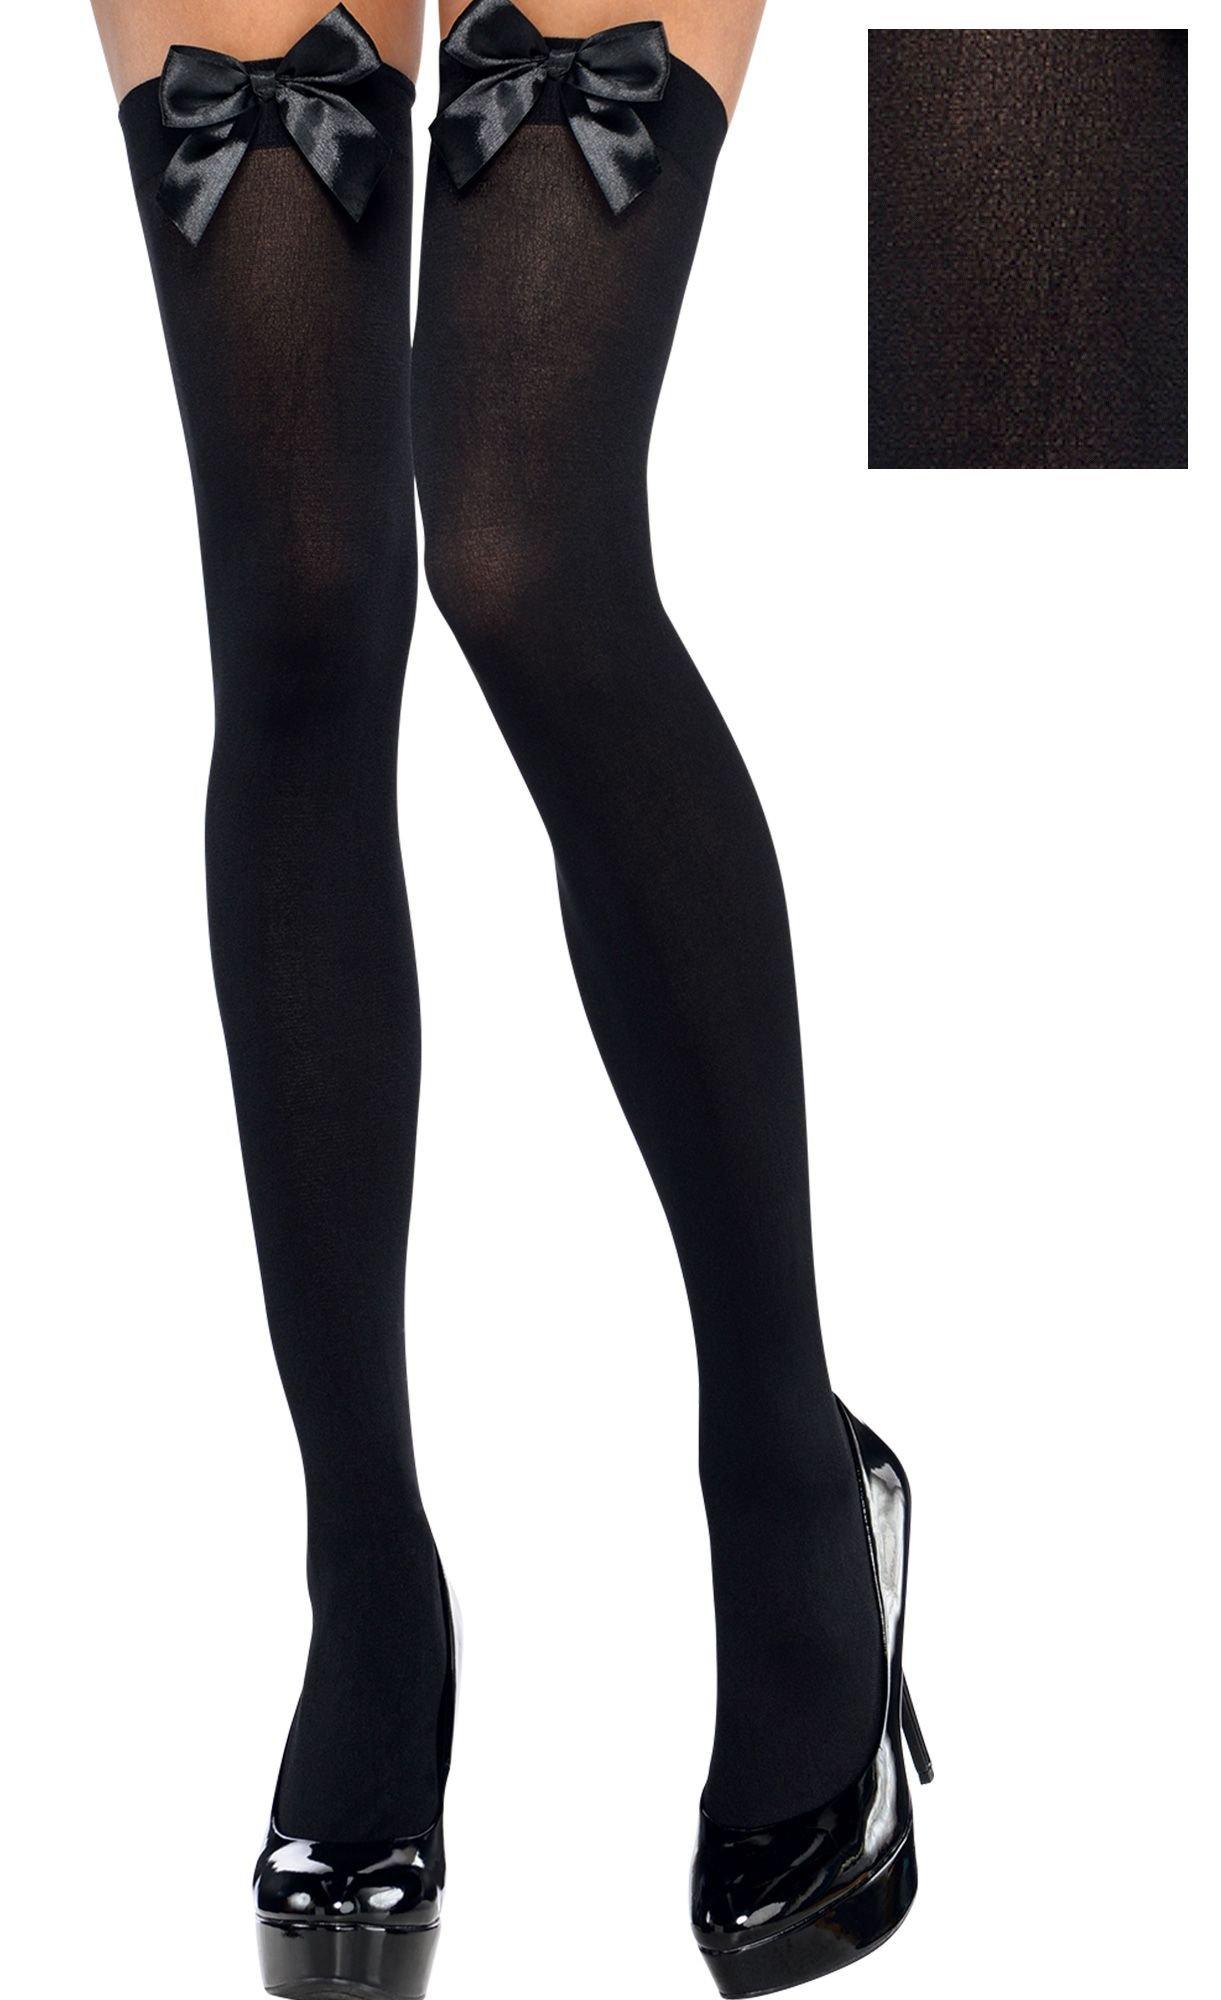 Sexy Lace-Top Black Thigh Highs - Hosiery for Women